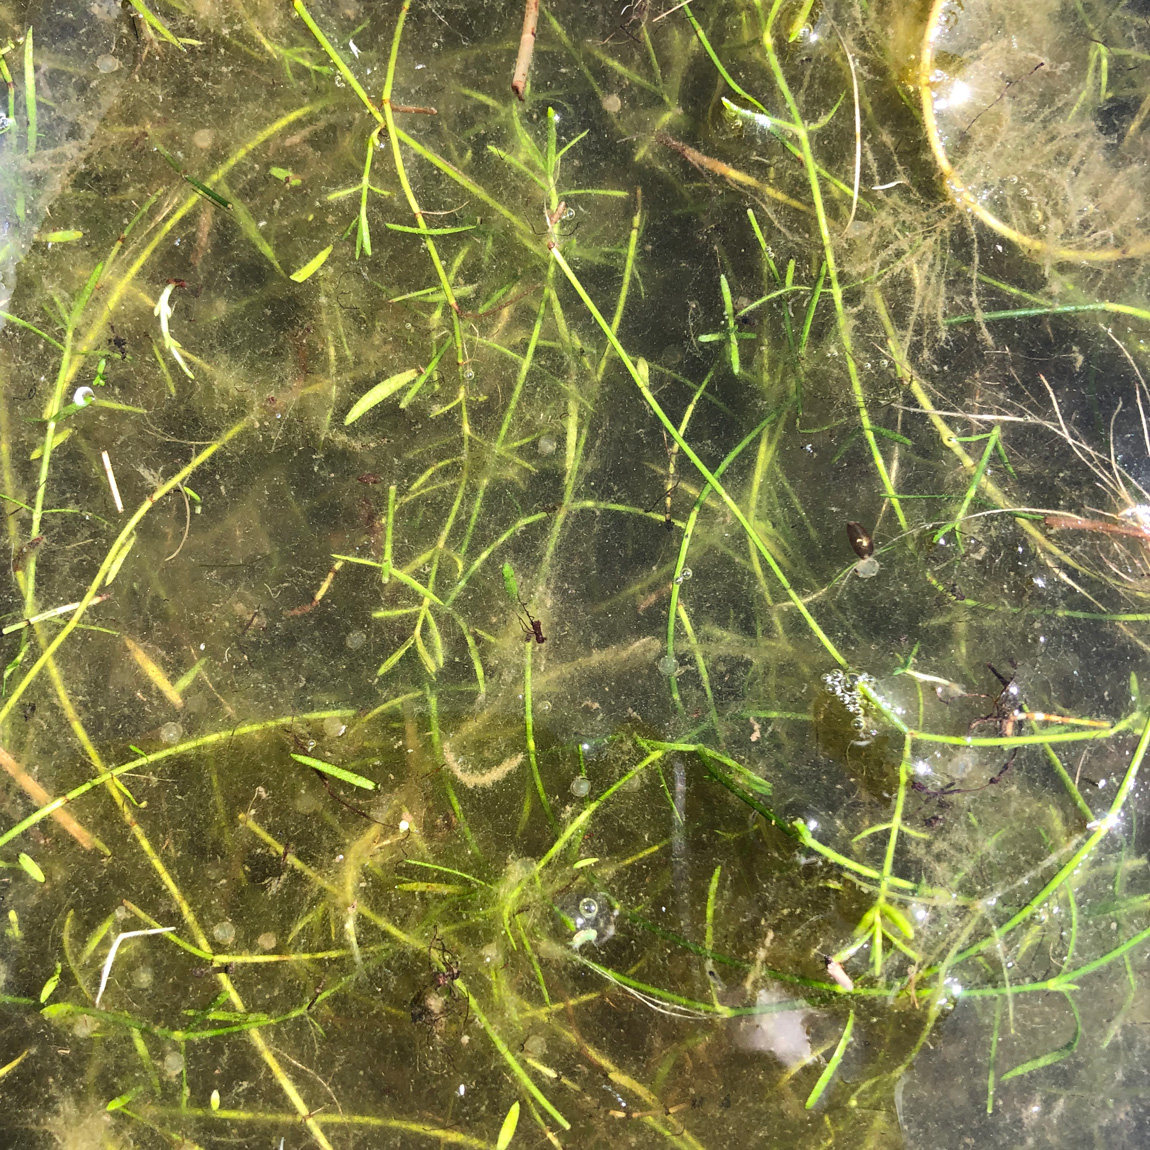 Close up of the weed, how many carp eggs can you count?